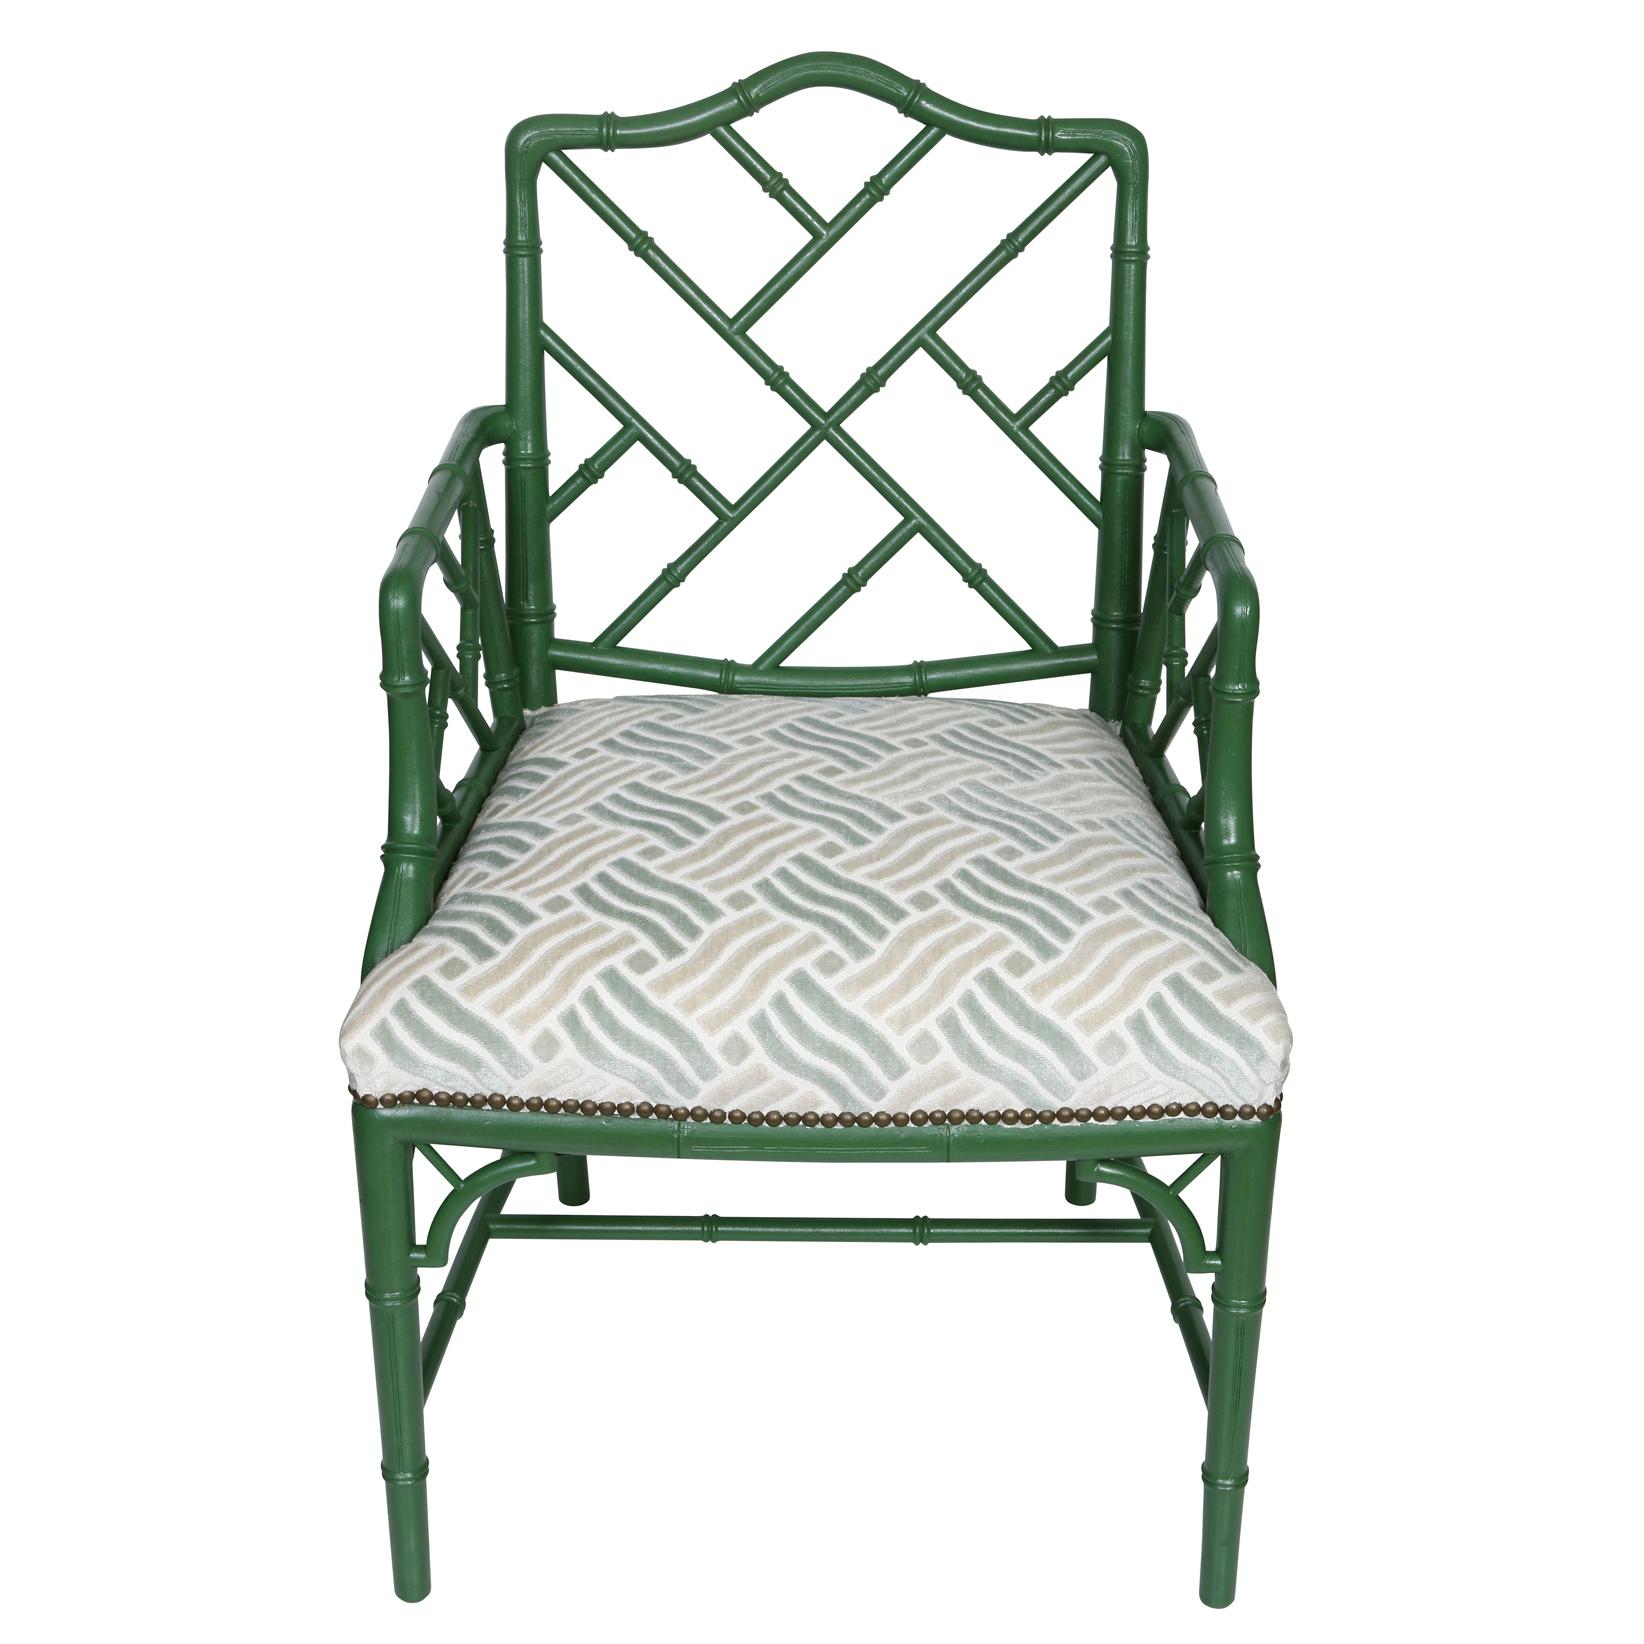 20th Century Pair of Green Bamboo Style Arm Chairs With Cut Velvet Seat Cushions For Sale